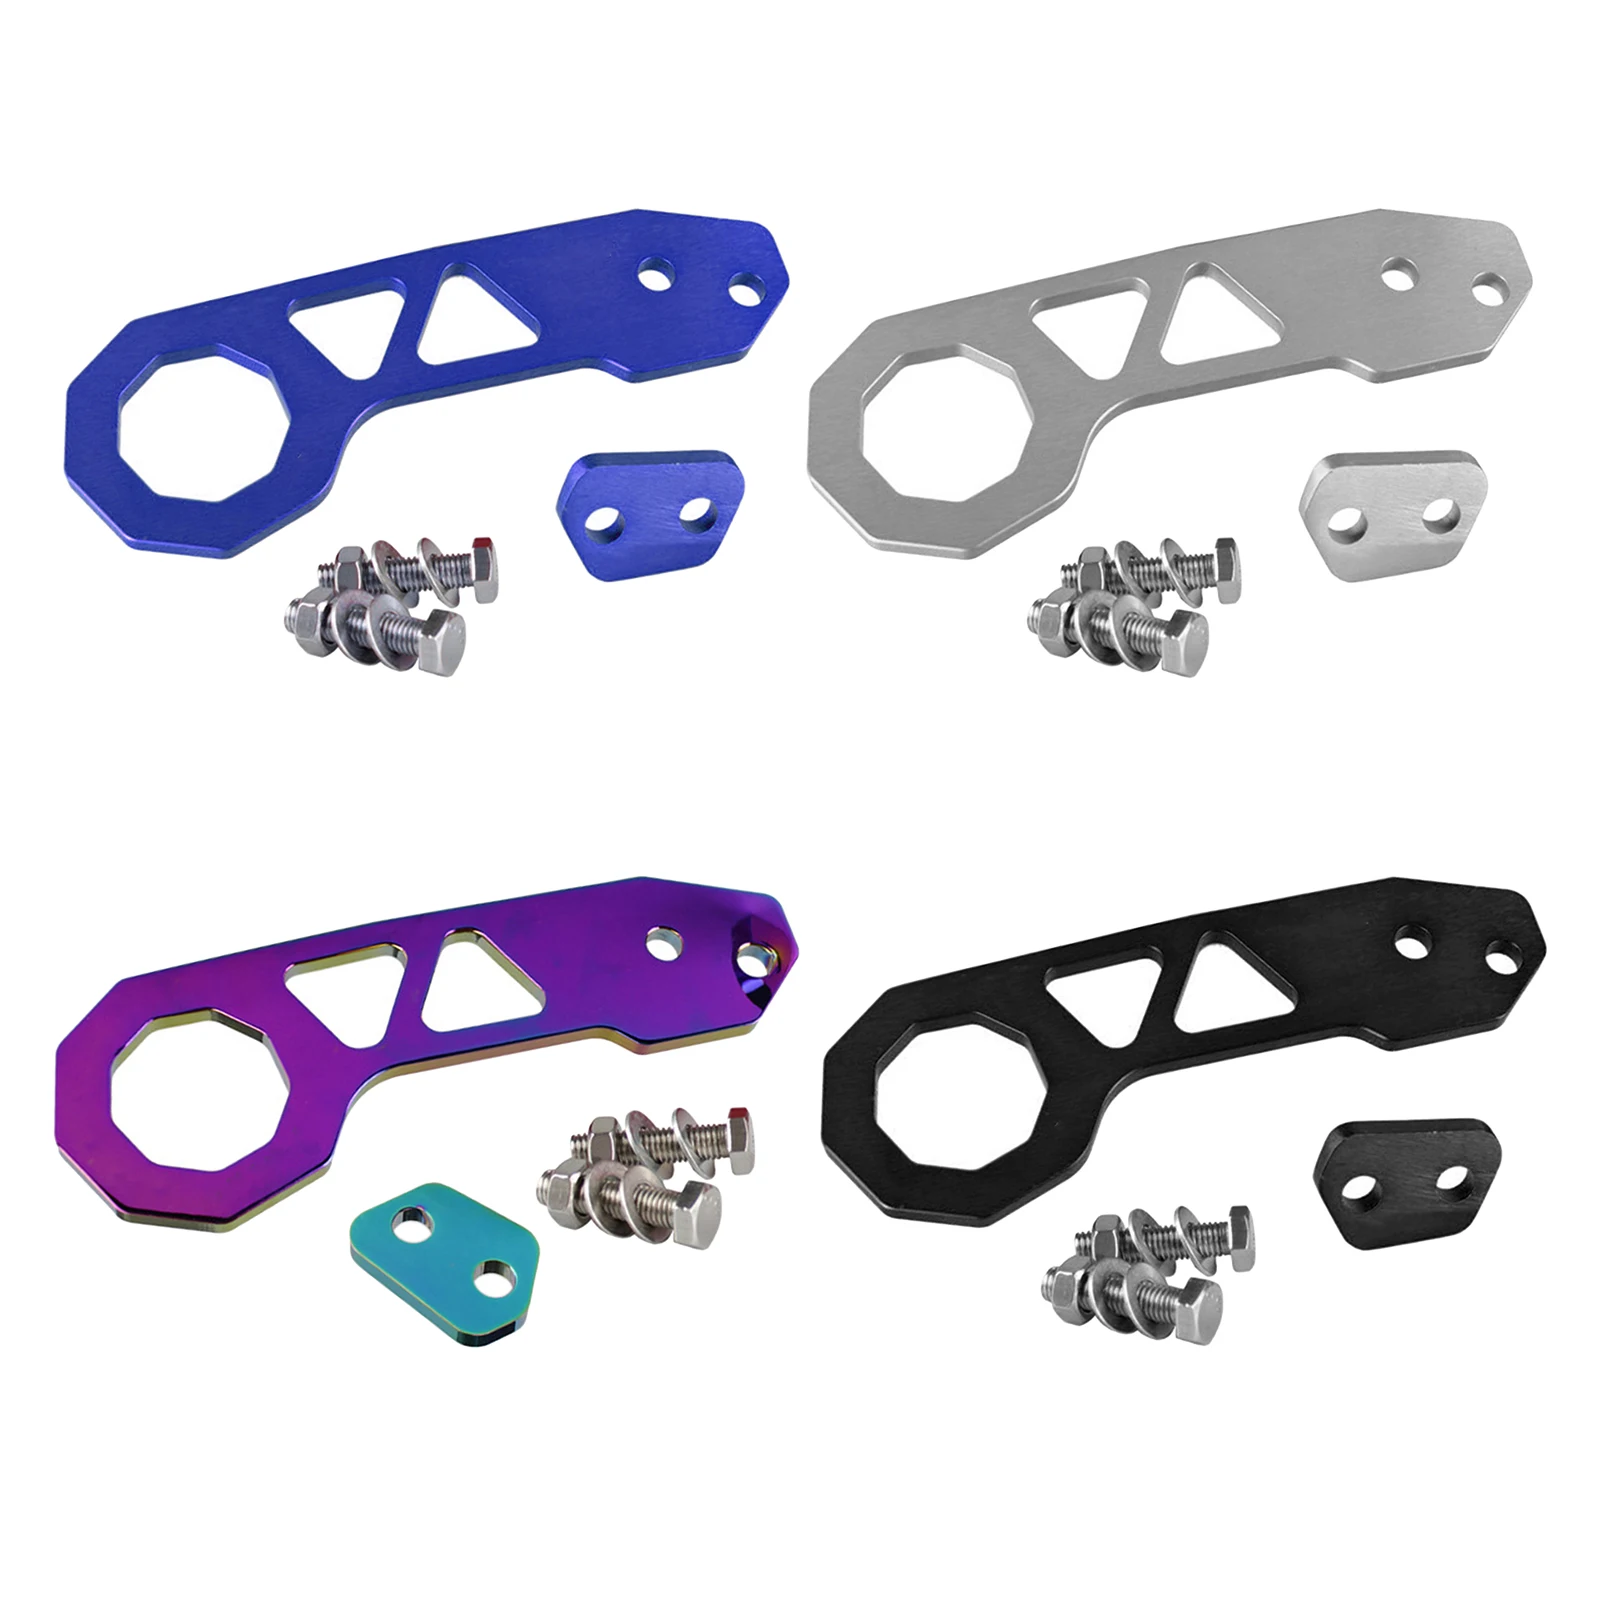 Universal JDM Style Anodized Billet Aluminum Alloy Racing Car Trailer Rear Tow Towing Hooks